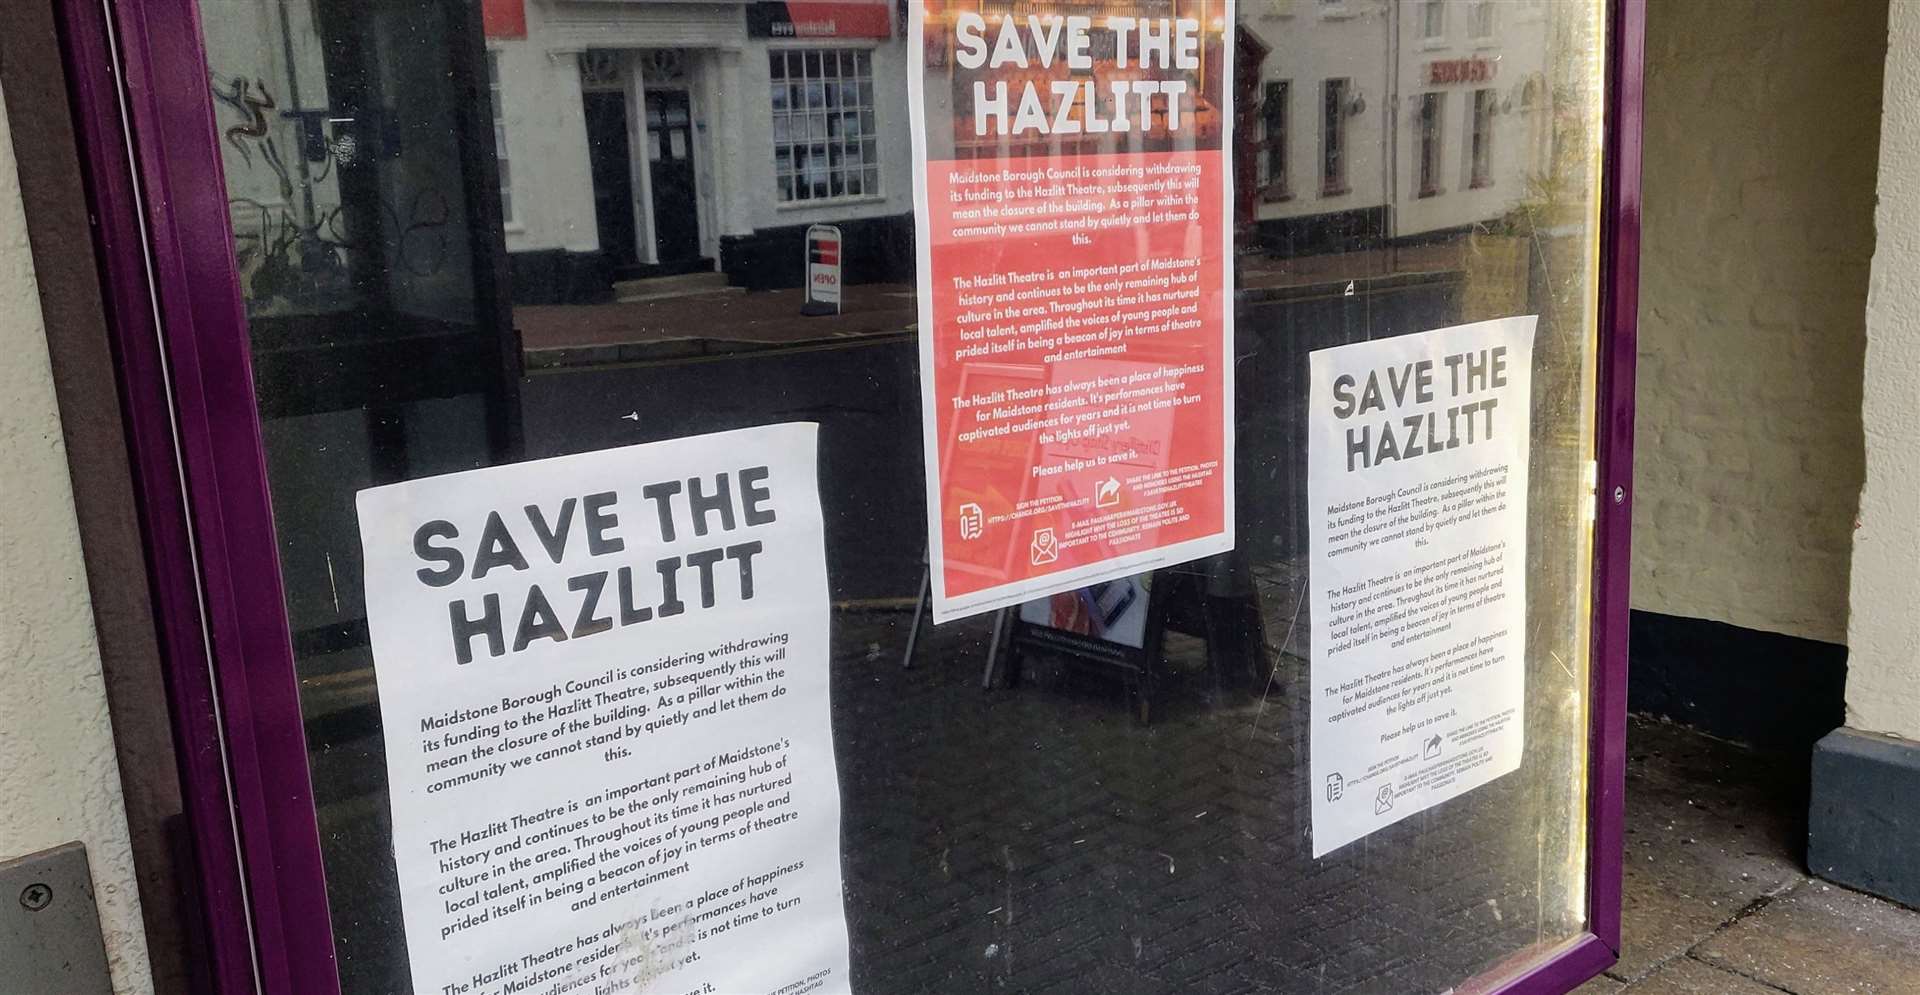 During the uncertainty, a campaign to 'Save the Hazlitt' was launched